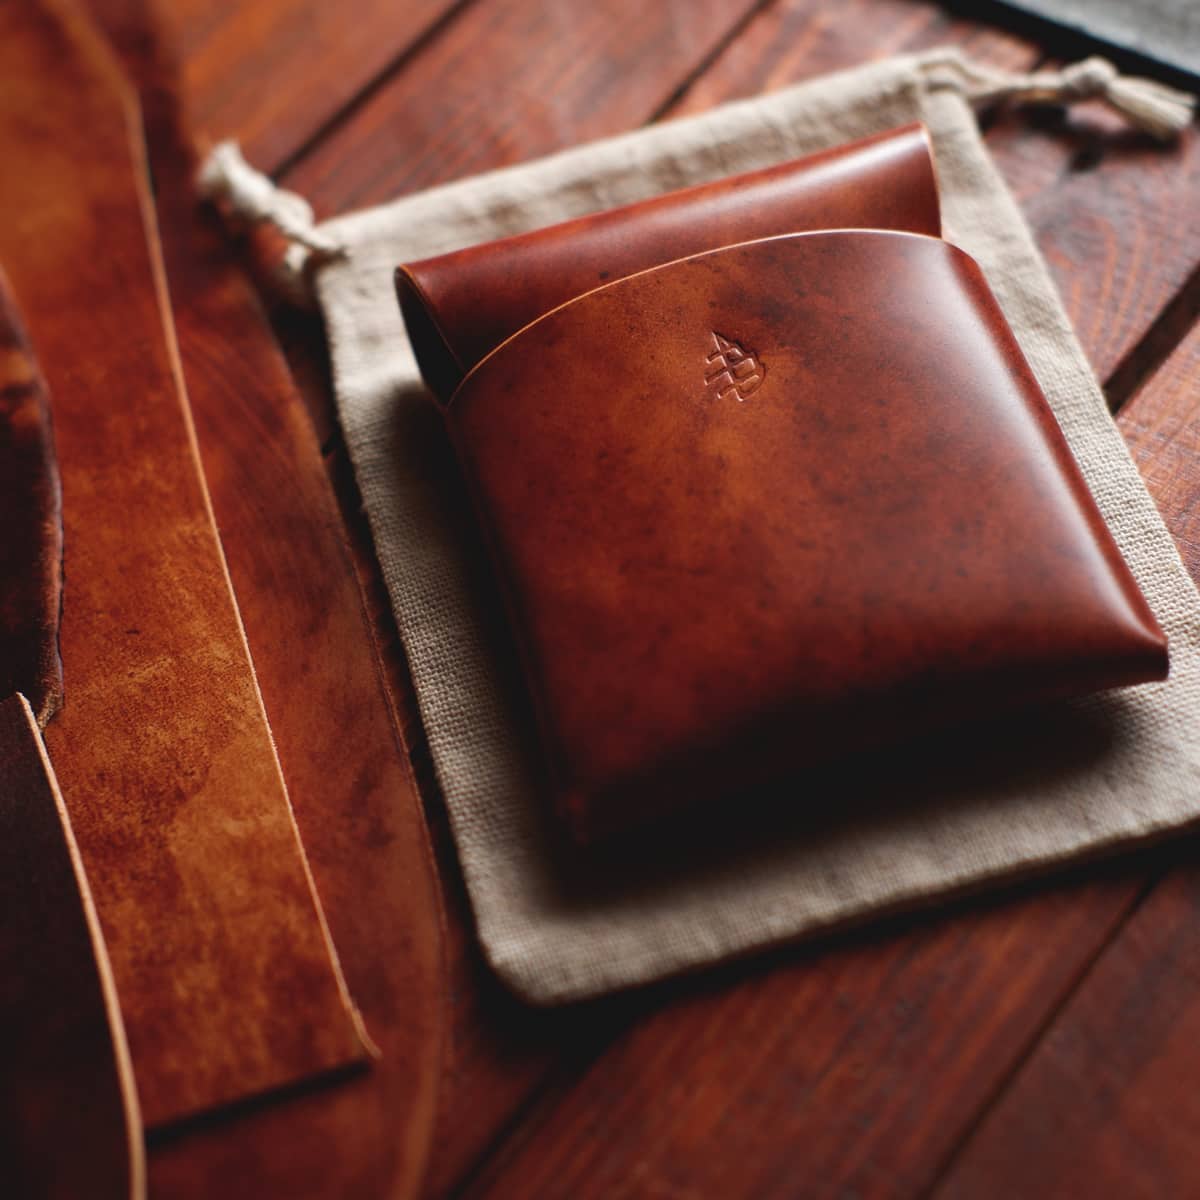 Closeup of The Lodgepole Stitchless Wallet in Cognac Marbled Shell Cordovan leather